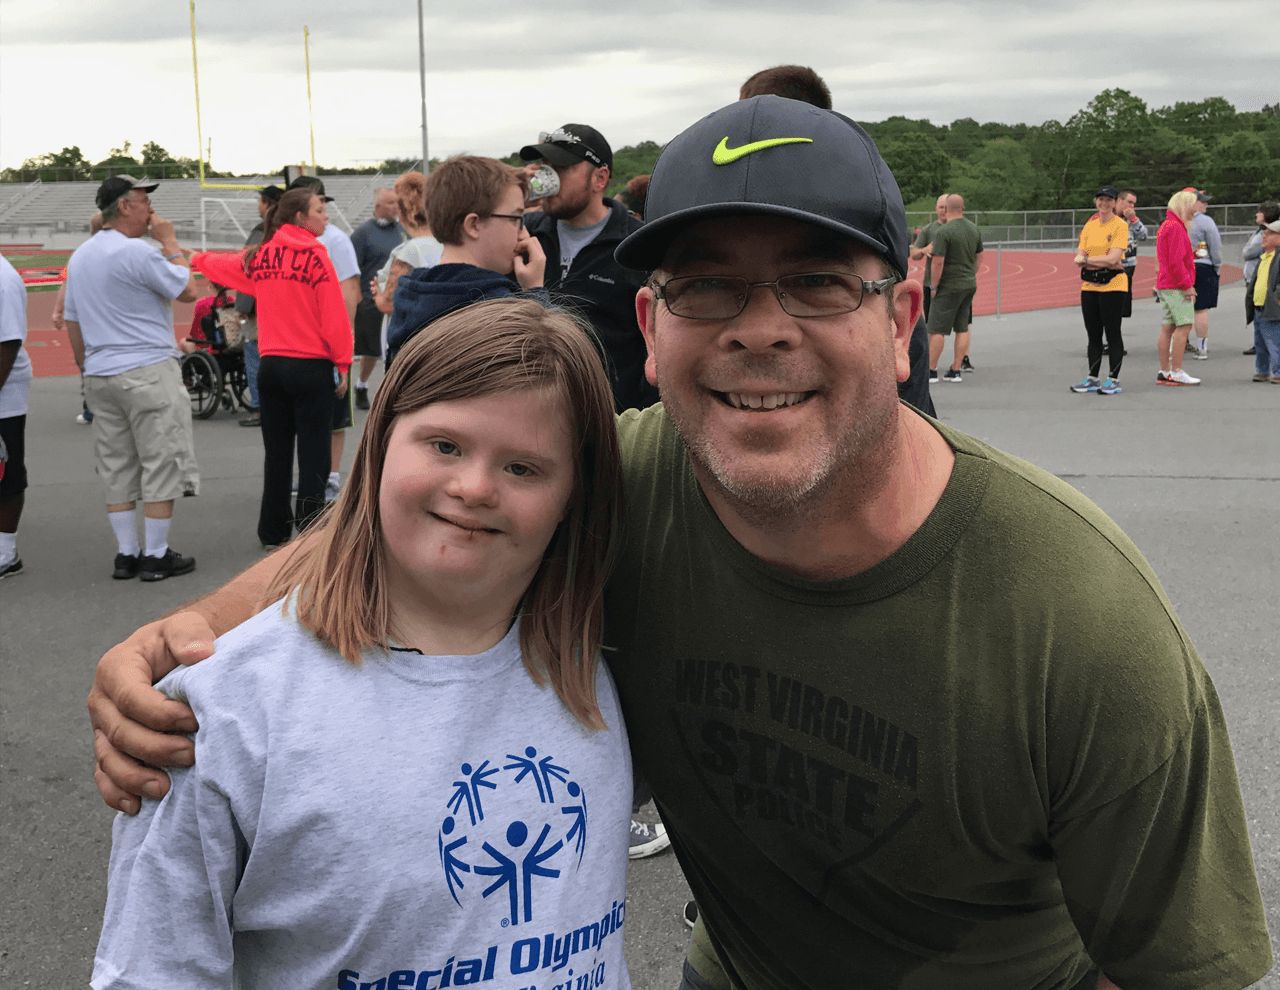 Rob Blair with an Eastern Panhandle Special Olympics Athlete